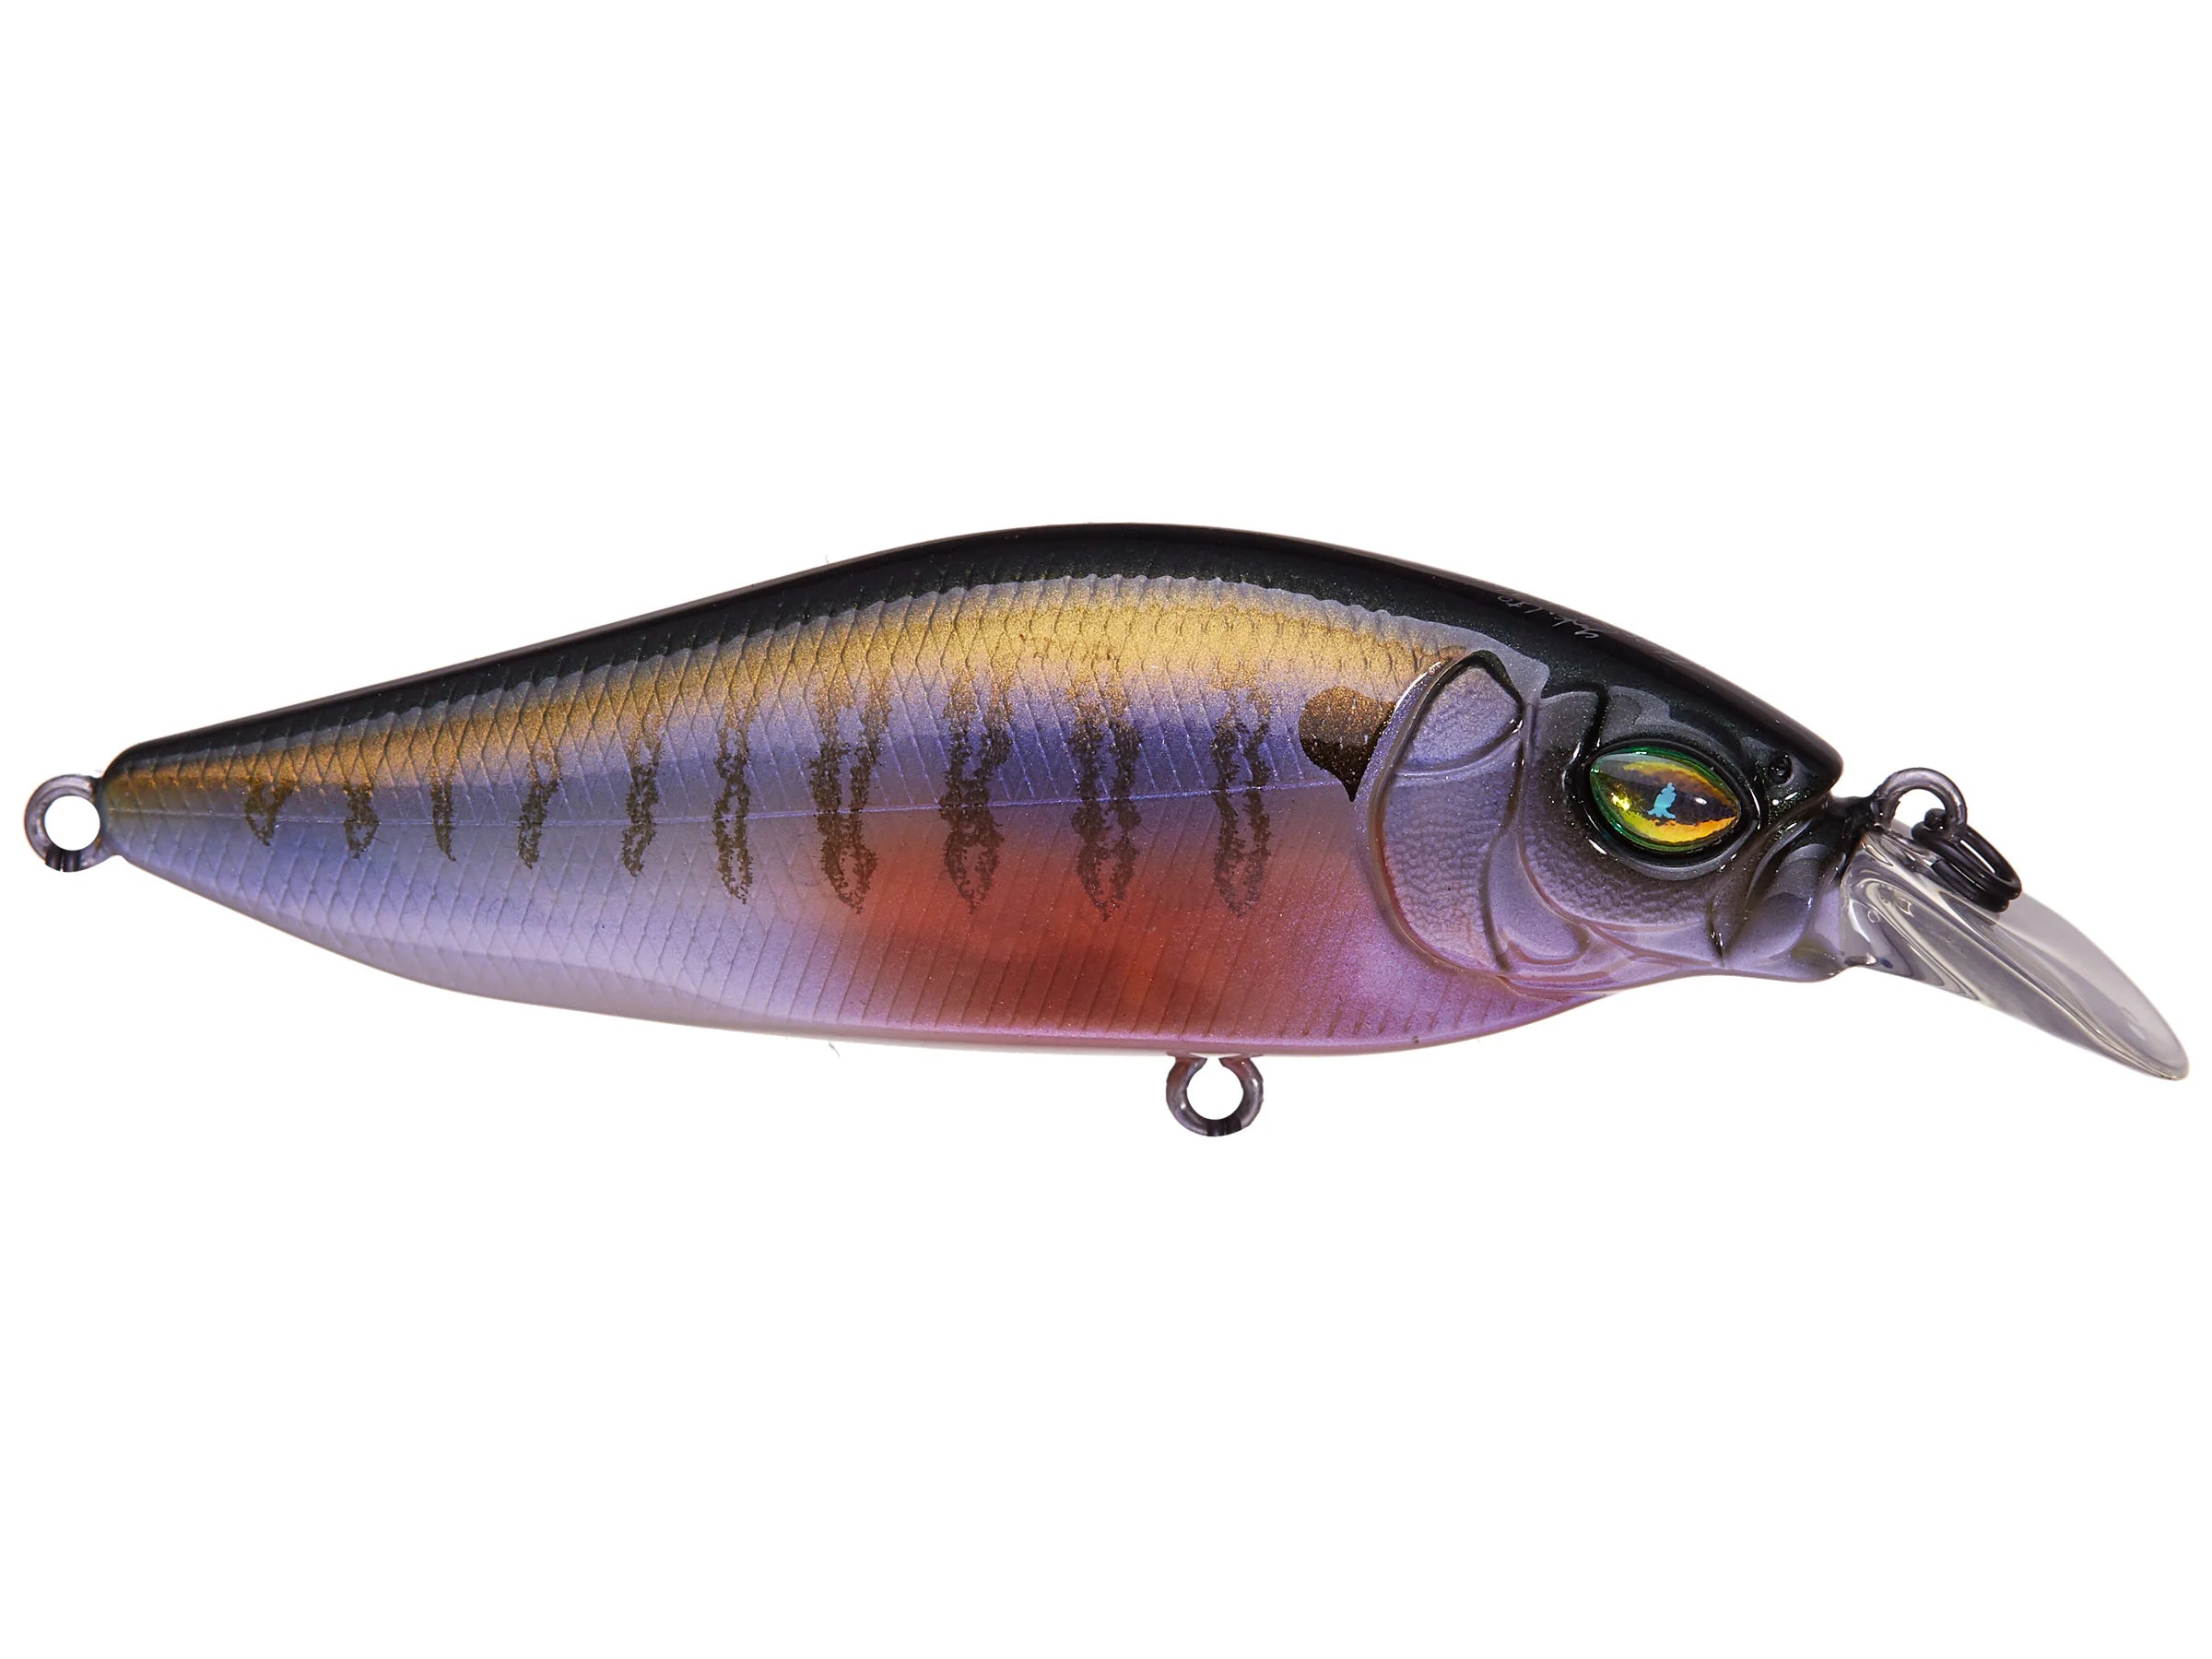 Megabass Soft Lure HAZEDONG Shad 3 Inches Ghost Shad - 1886 for